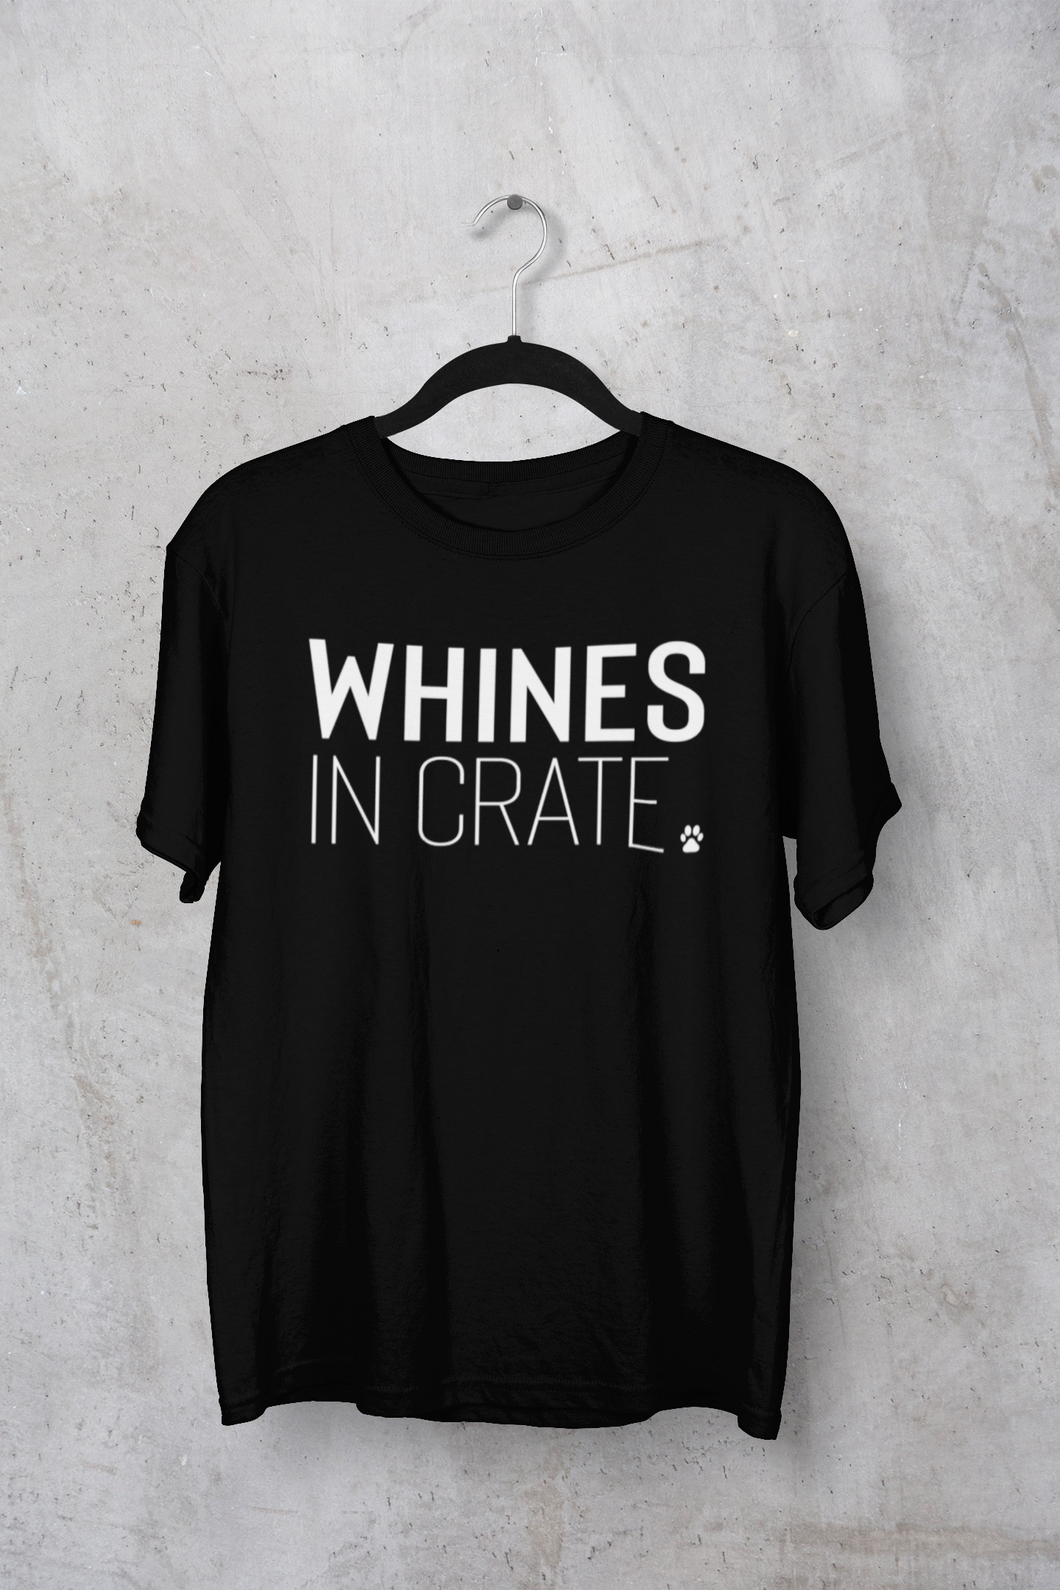 Whines In Crate Men's/Unisex or Women's T-shirt